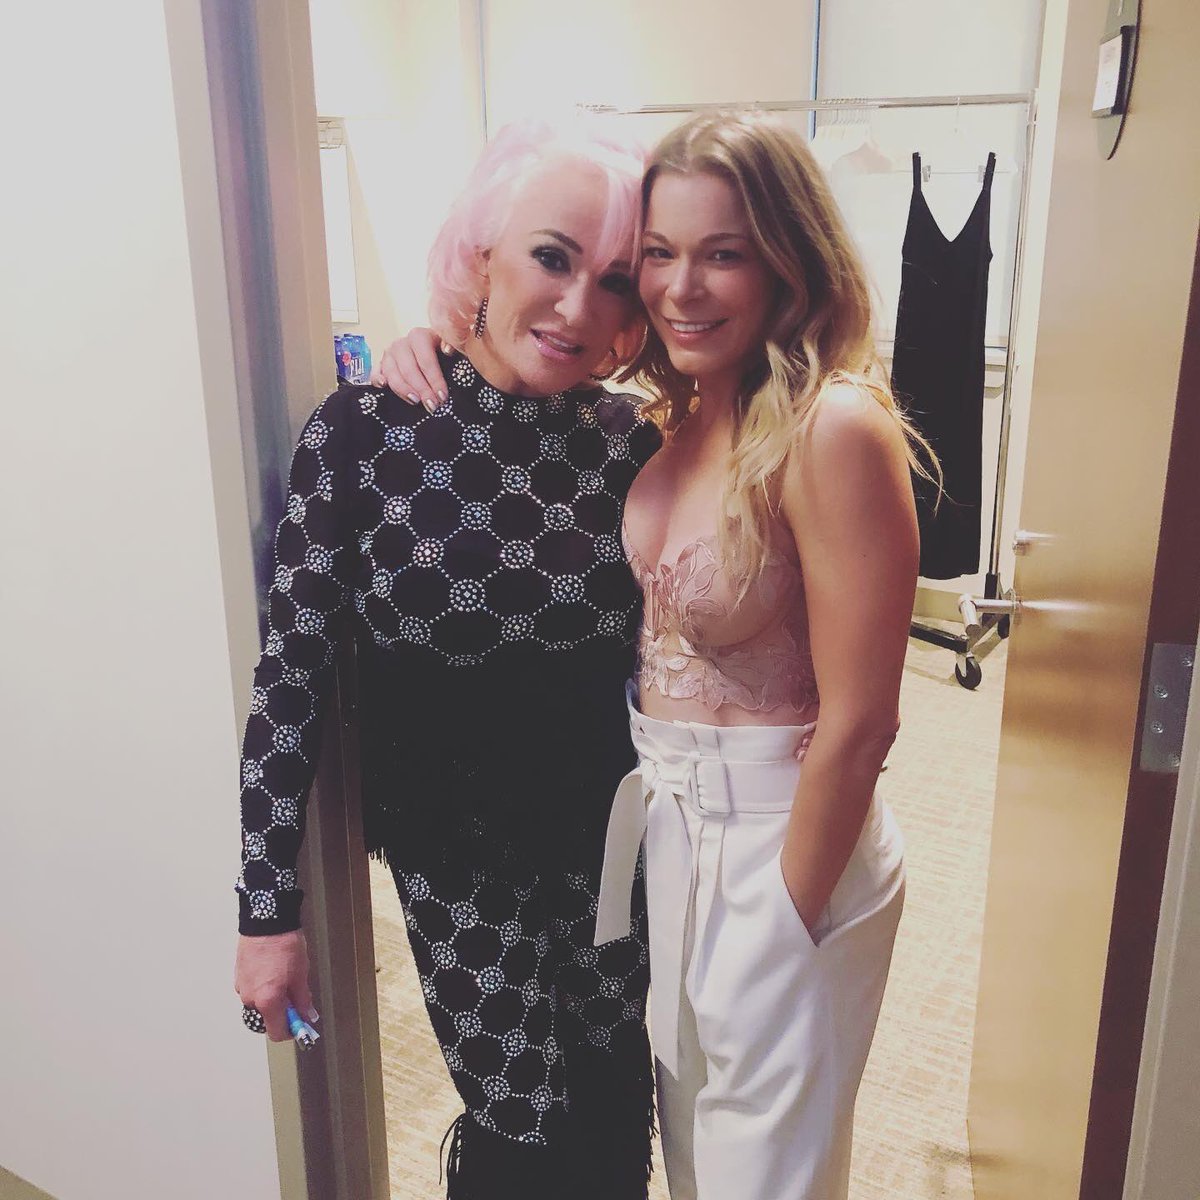 My girl! I LovE you @tanya_tucker SO MUCH! #soulsisters https://t.co/nyhnhAhok1